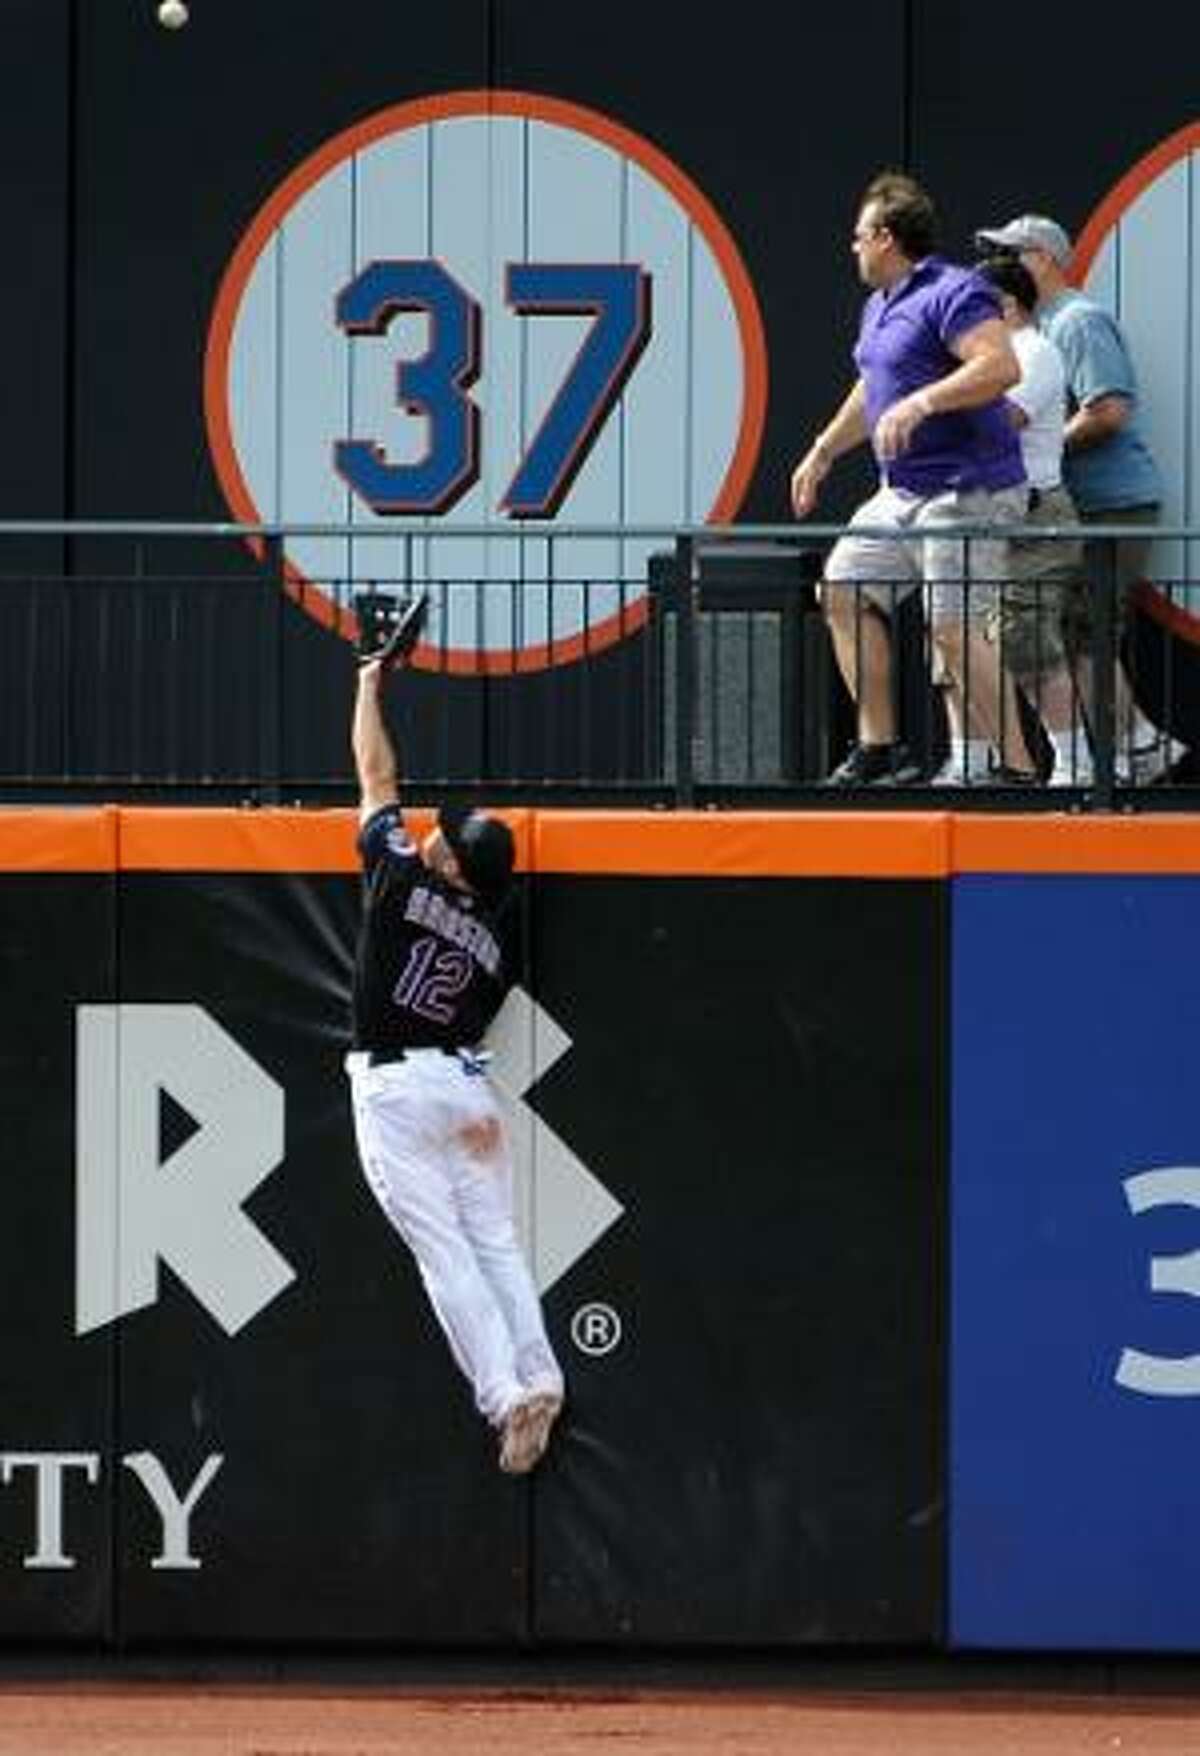 ASSOCIATED PRESS New York Mets left fielder Scott Hairston (12) leaps into the air to try to catch a two-run home run hit by Los Angeles Dodgers' Juan Uribe in the ninth inning of Saturday's game at Citi Field in New York. The Dodgers won 8-5.